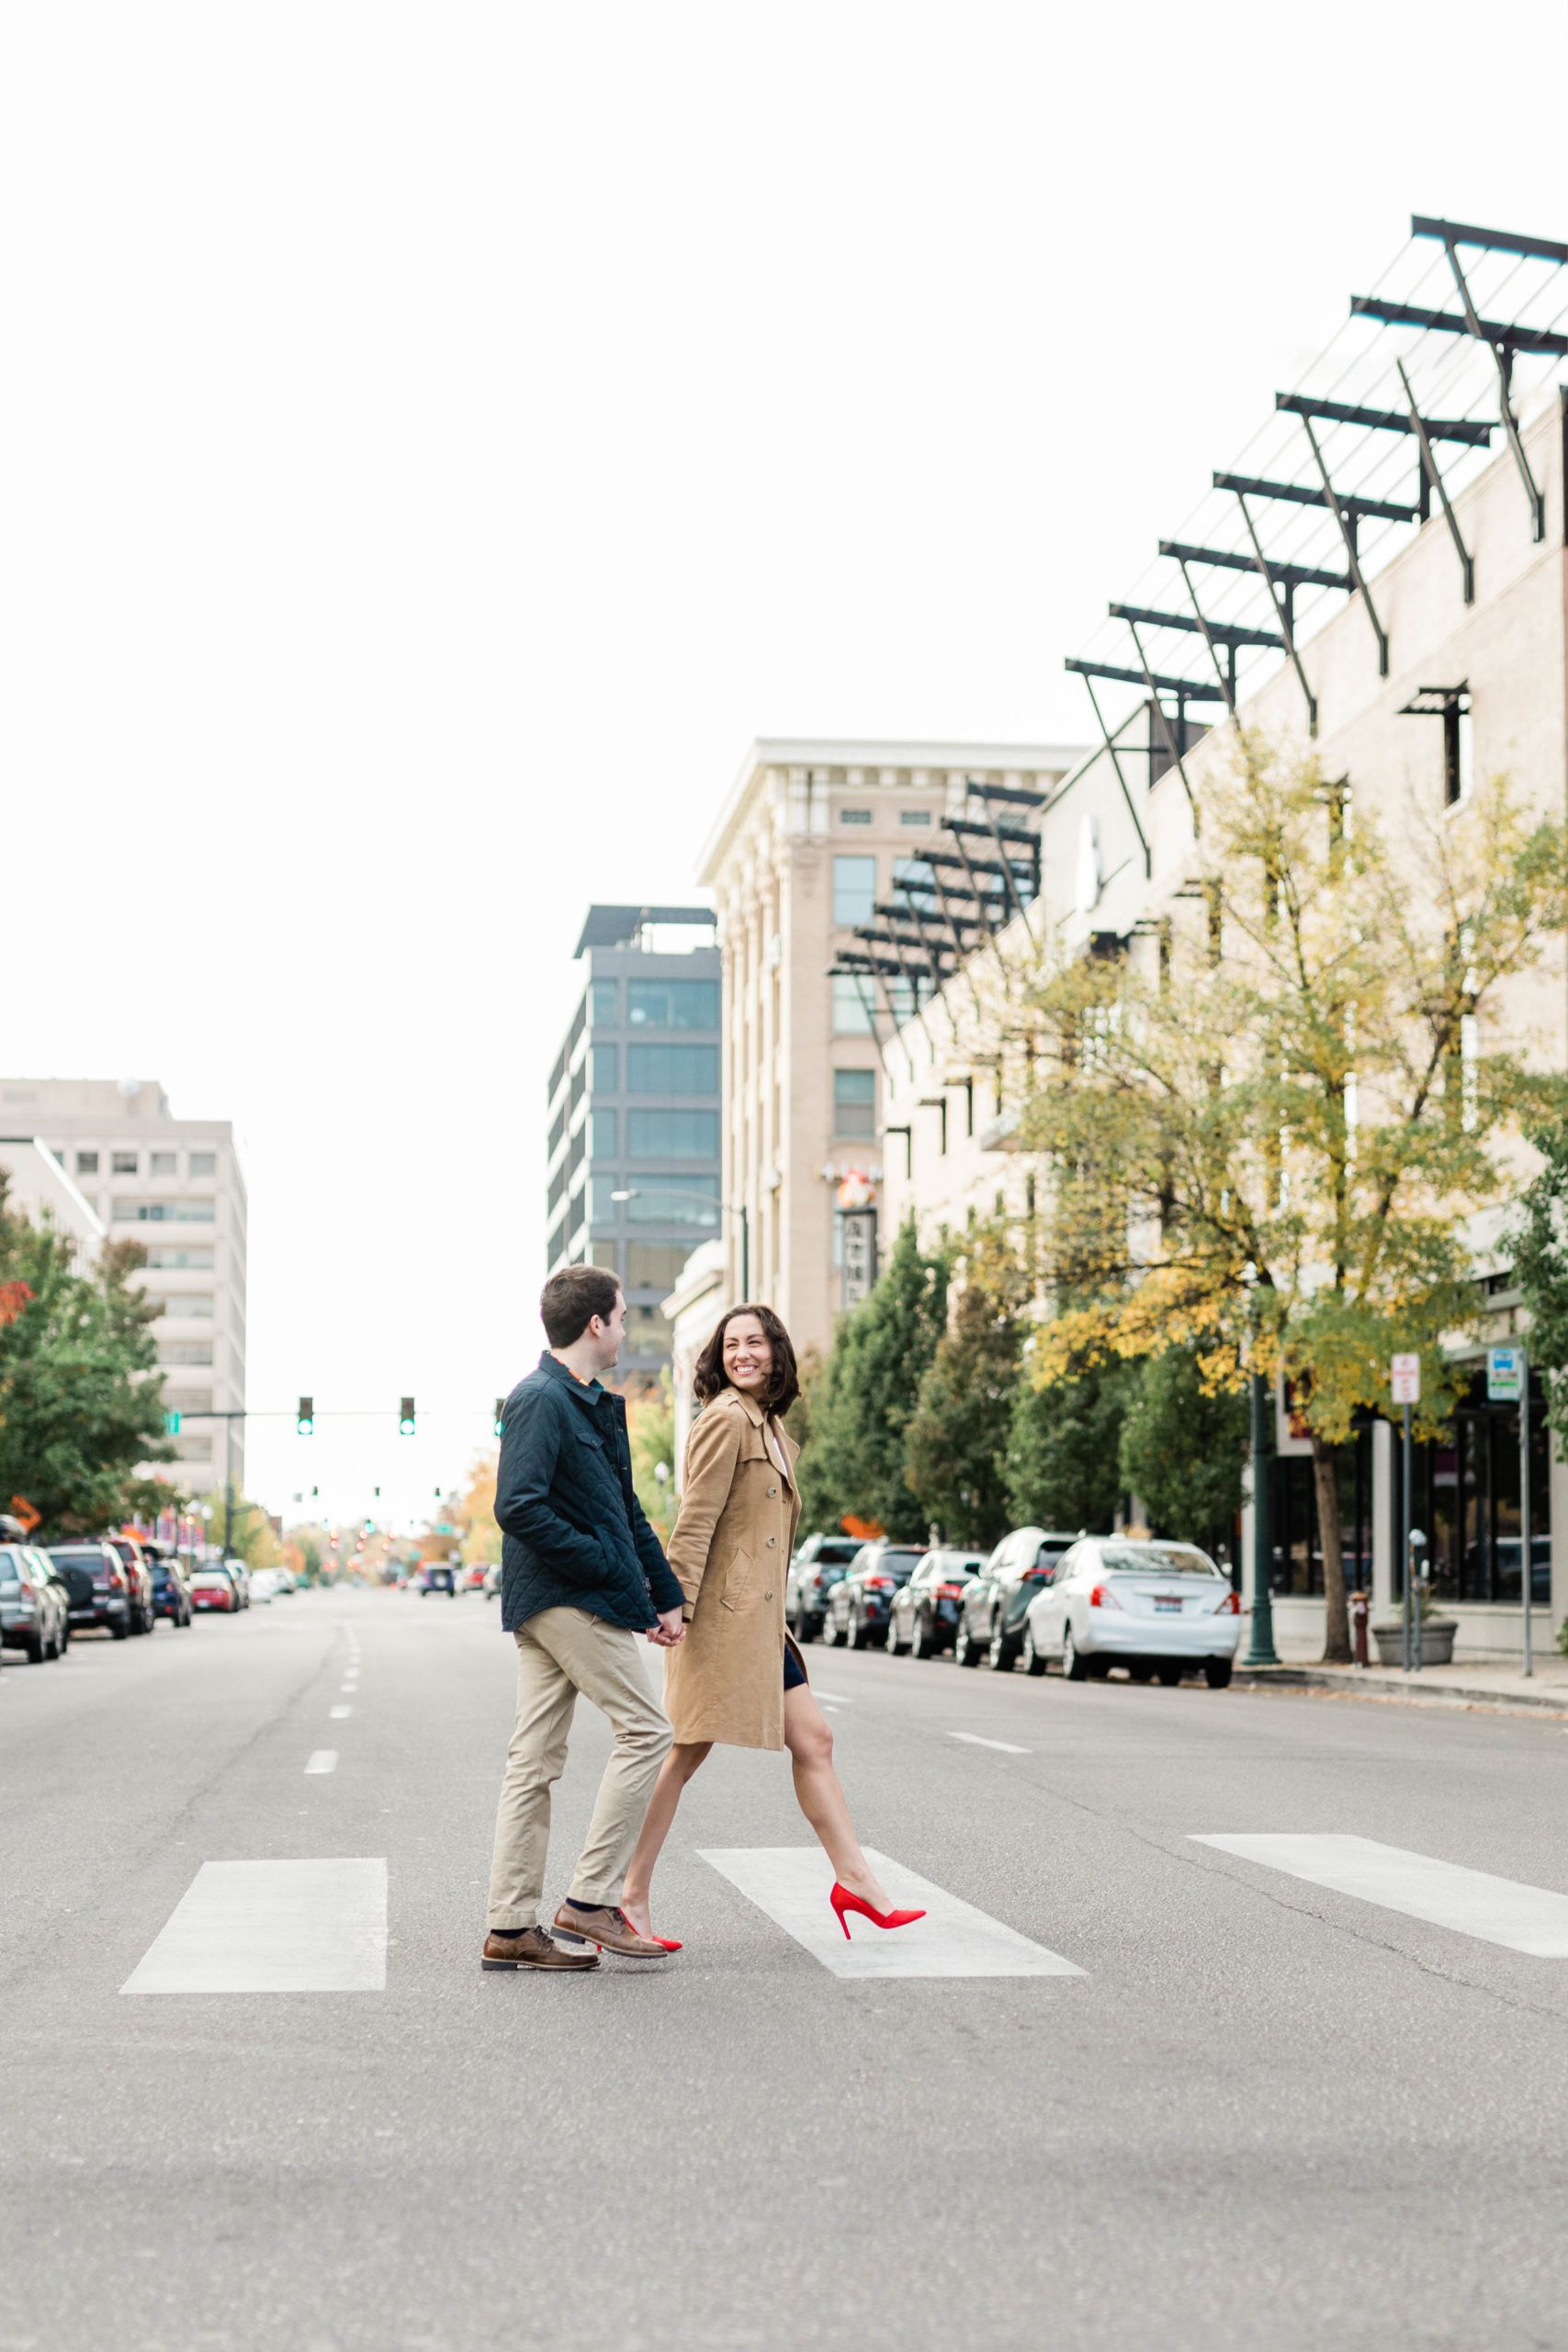 Boise wedding photographer captures couple walking in the streets in Boise